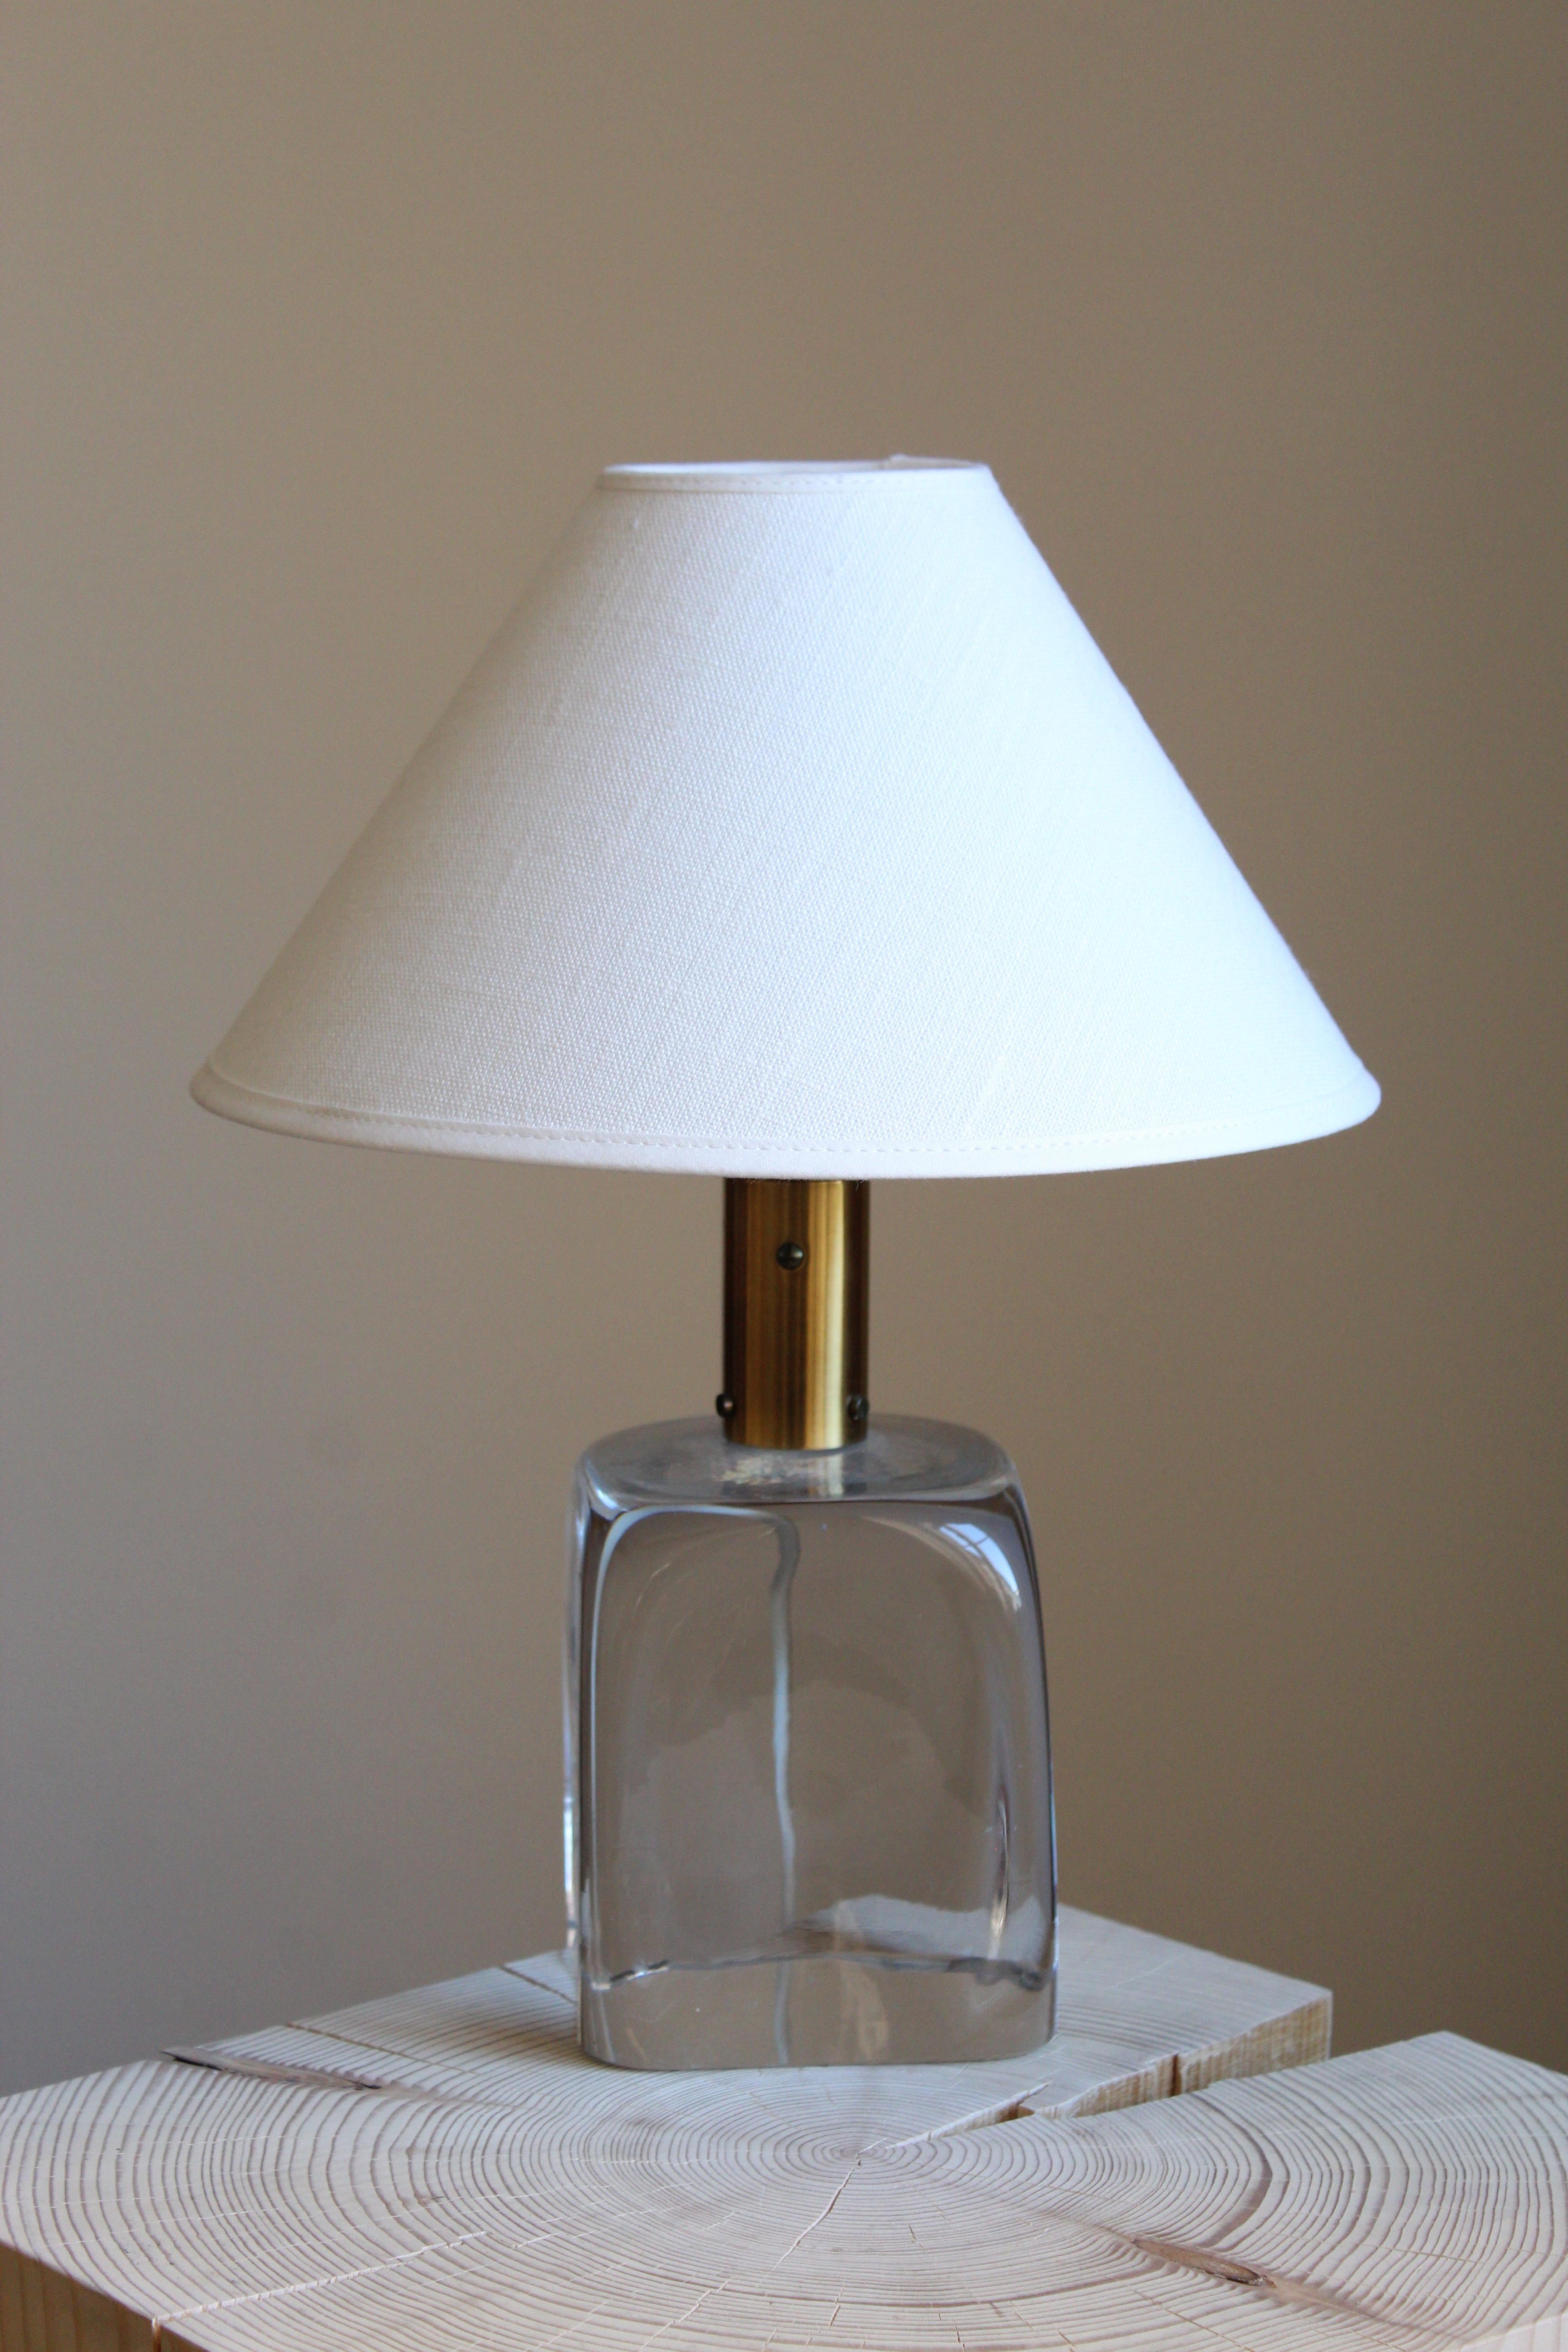 An early table lamp by Josef Frank, in brass and studio glass from Reijmyre Glasbruk. Produced by Svenskt Tenn, 1960s.

Stated dimensions excluding lampshade. Sold without lampshade.

Other lighting designers of the period include Hans-Agne